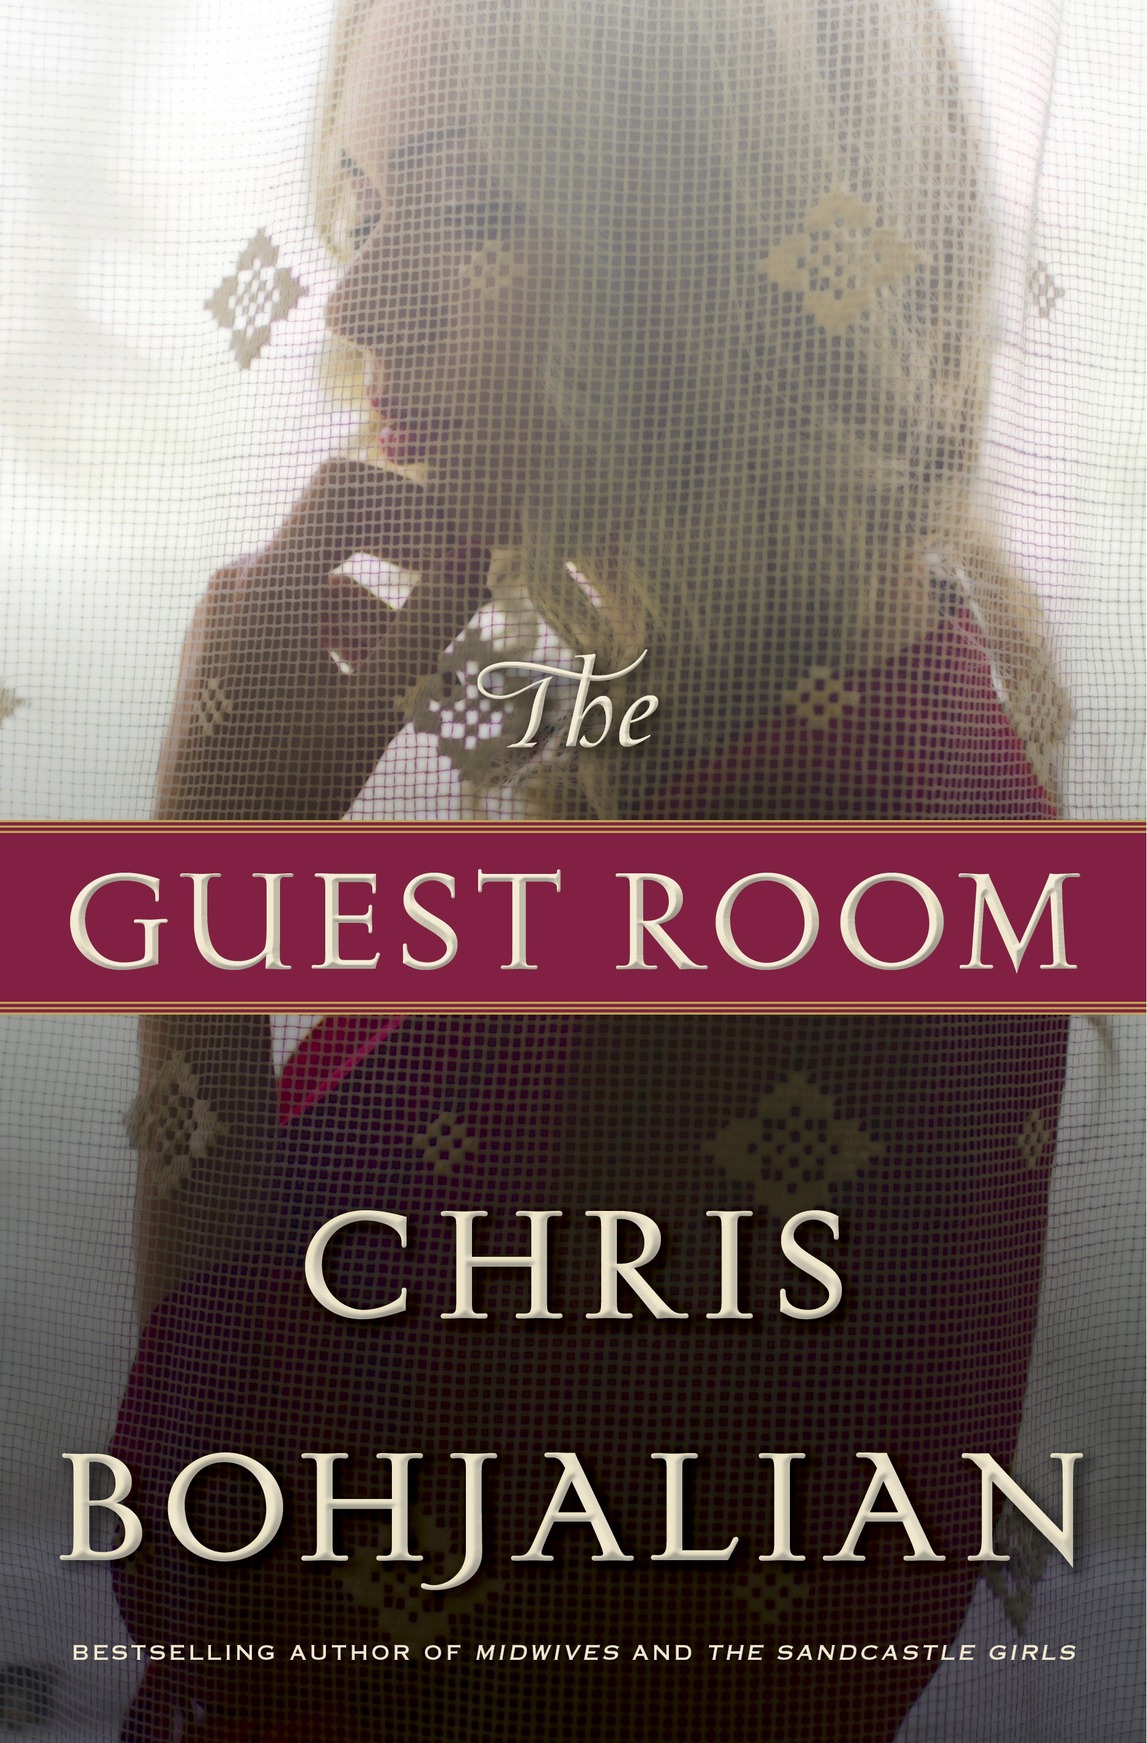 The Guest Room (2016) by Chris Bohjalian